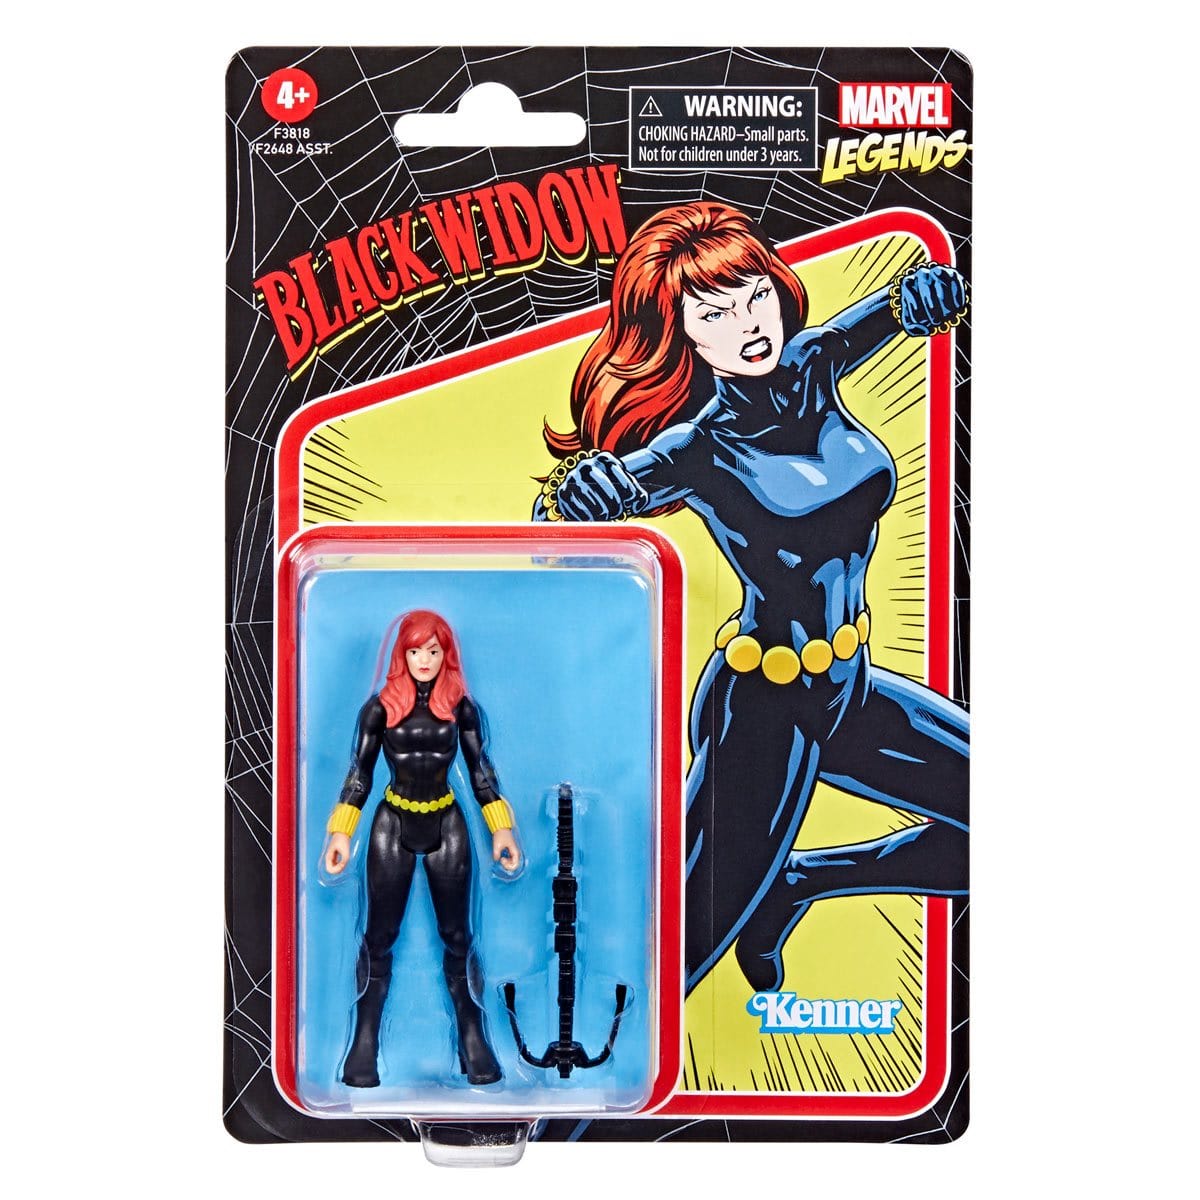 Marvel Legends Retro 375 Collection Black Widow 3 3/4-Inch Action Figure In box